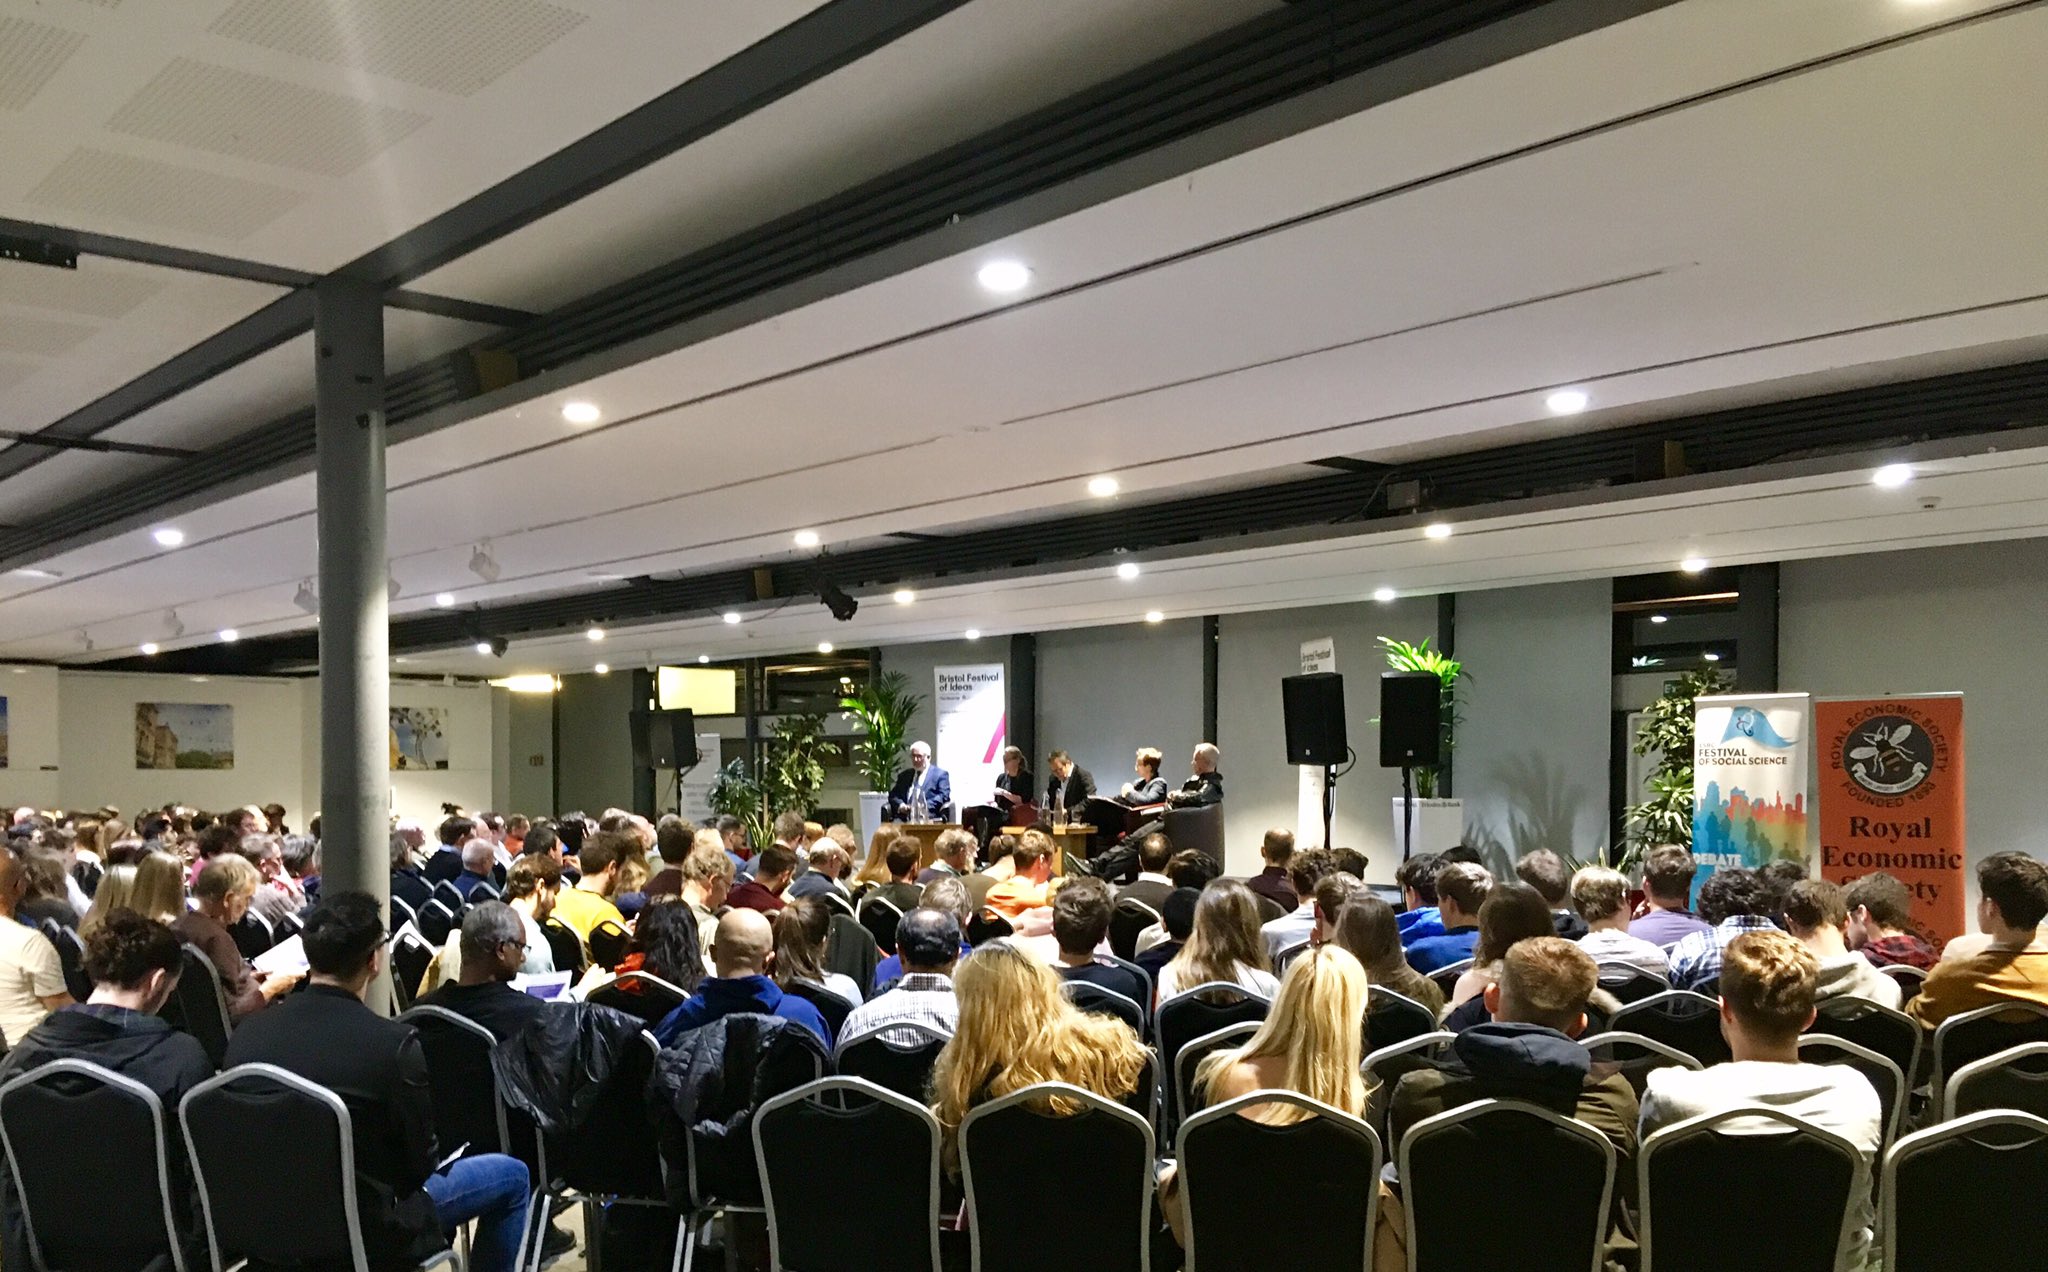 We're pleased to be supporting #economicsfest here in Bristol. Standing room only for this evening's session, The Future of Money. https://t.co/puM1r83lli